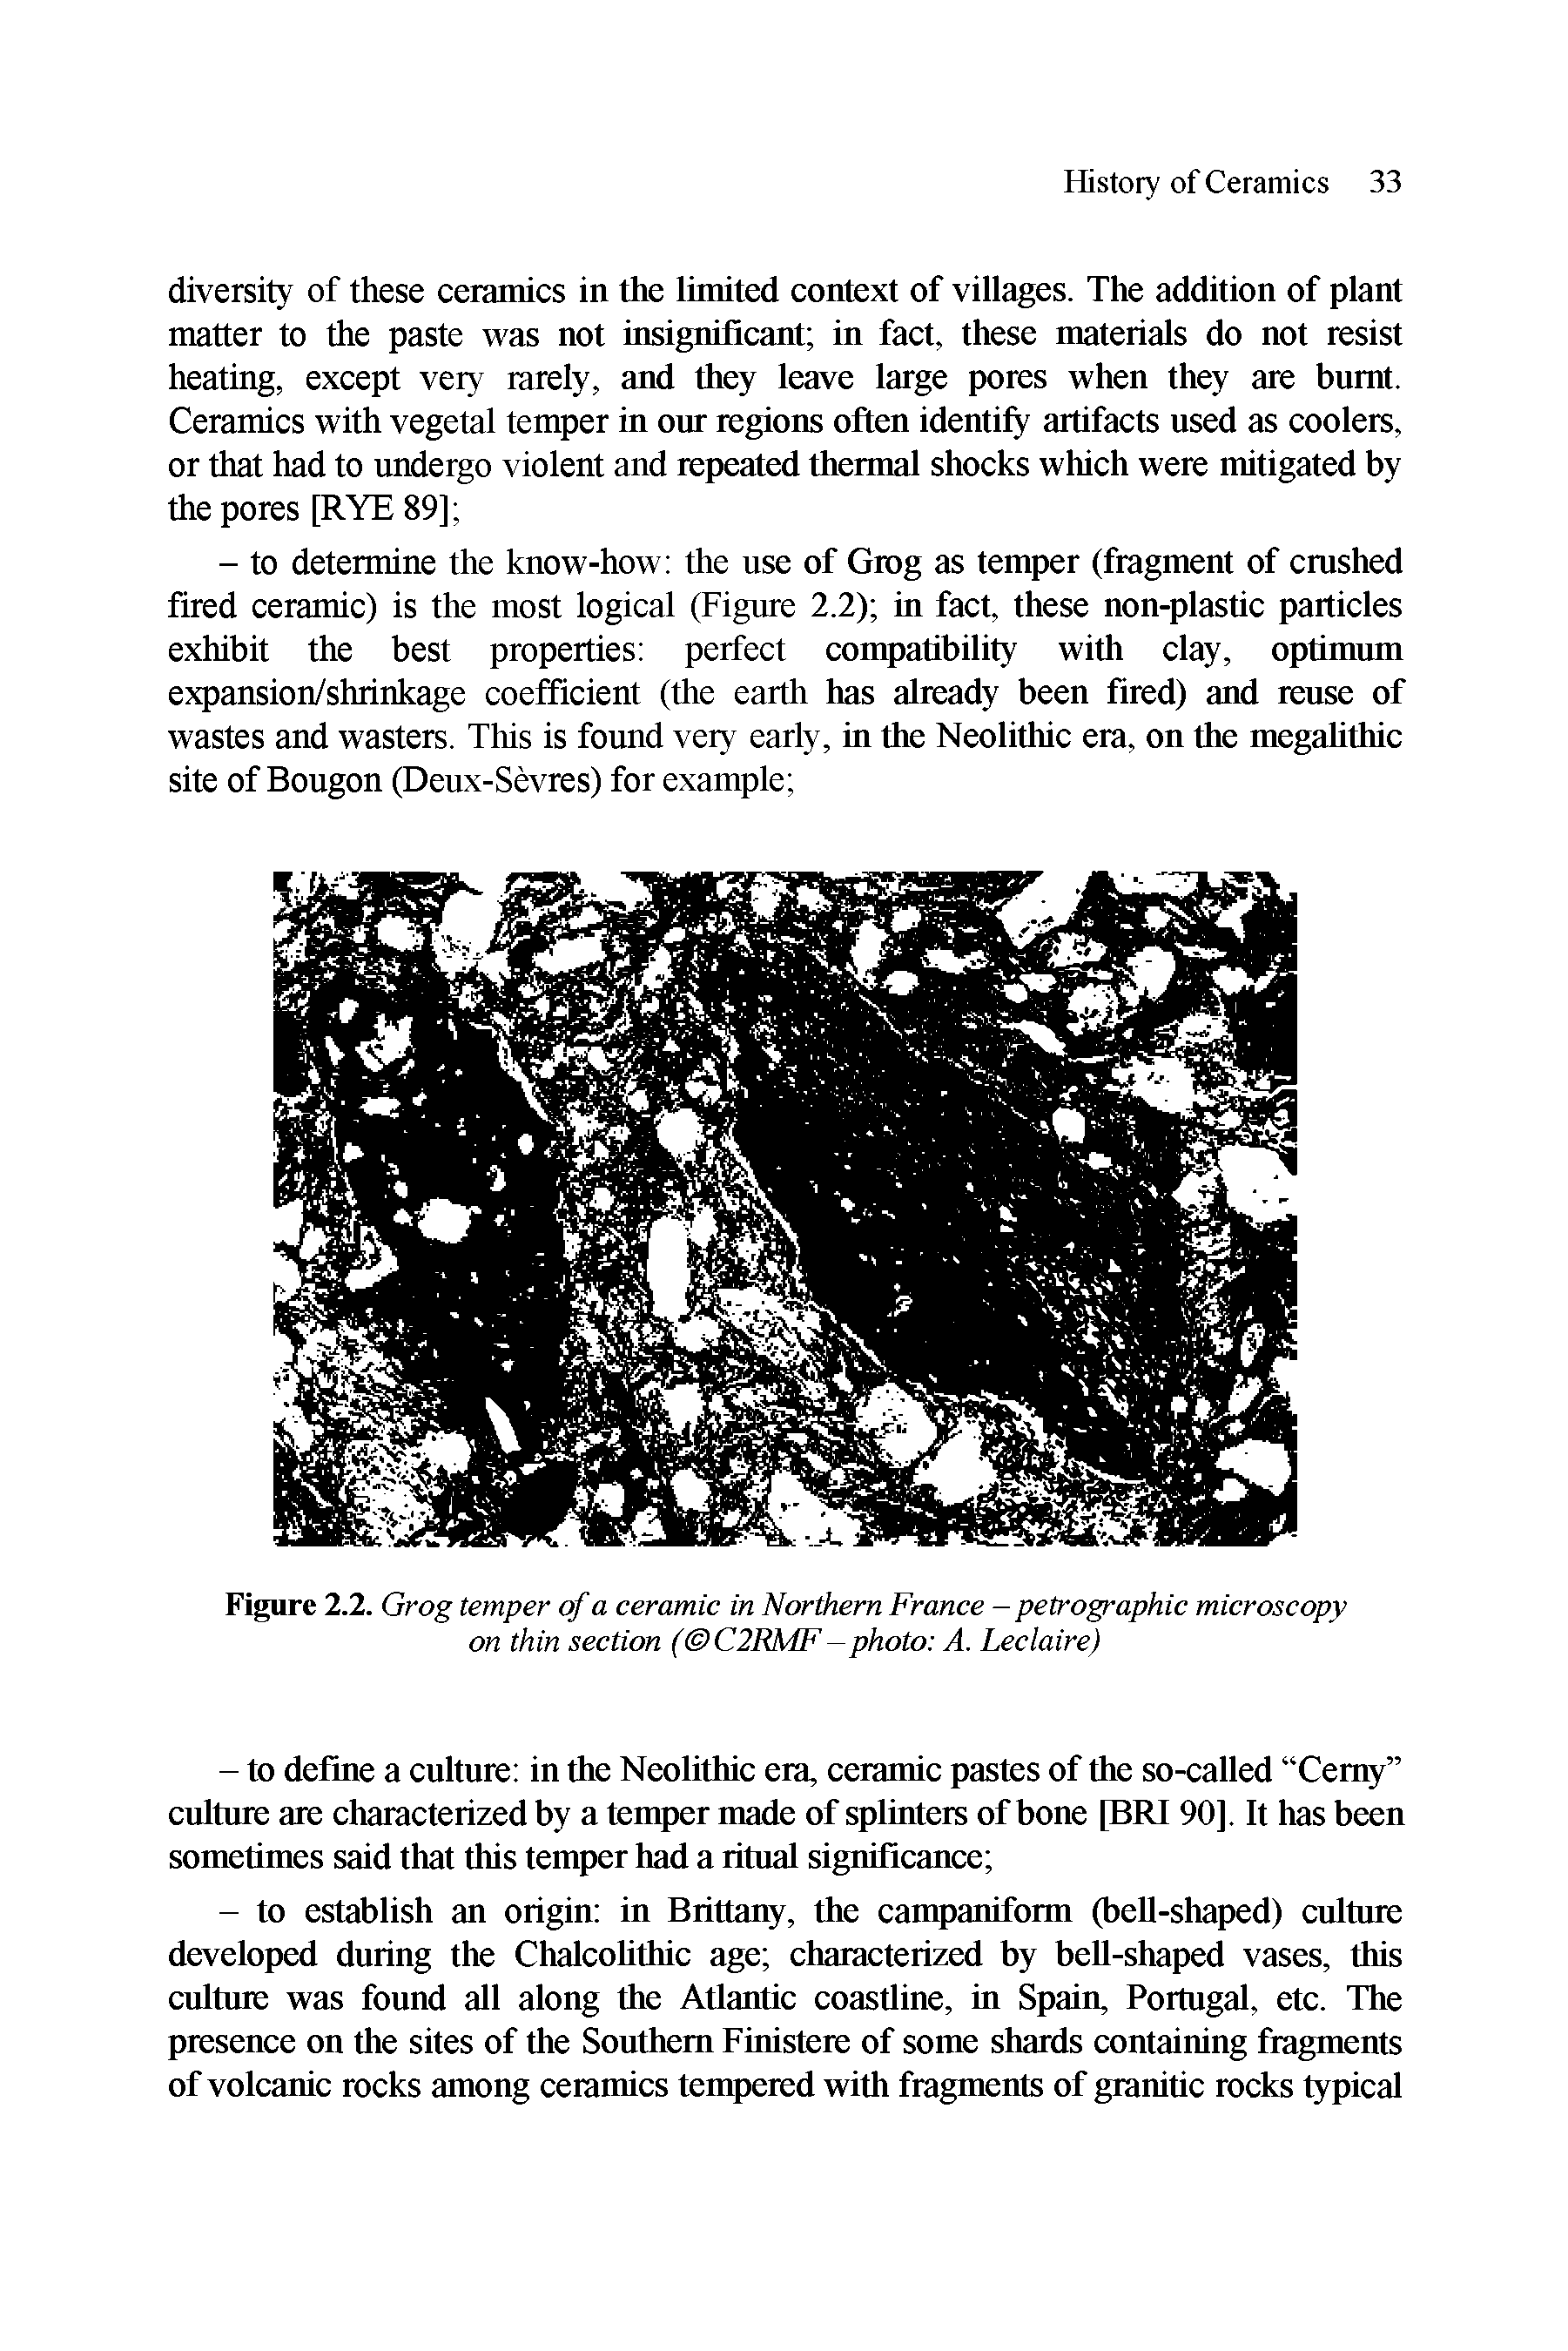 Figure 2.2. Grog temper of a ceramic in Northern France - petrographic microscopy on thin section ( C2RMF - photo A. Leclaire)...